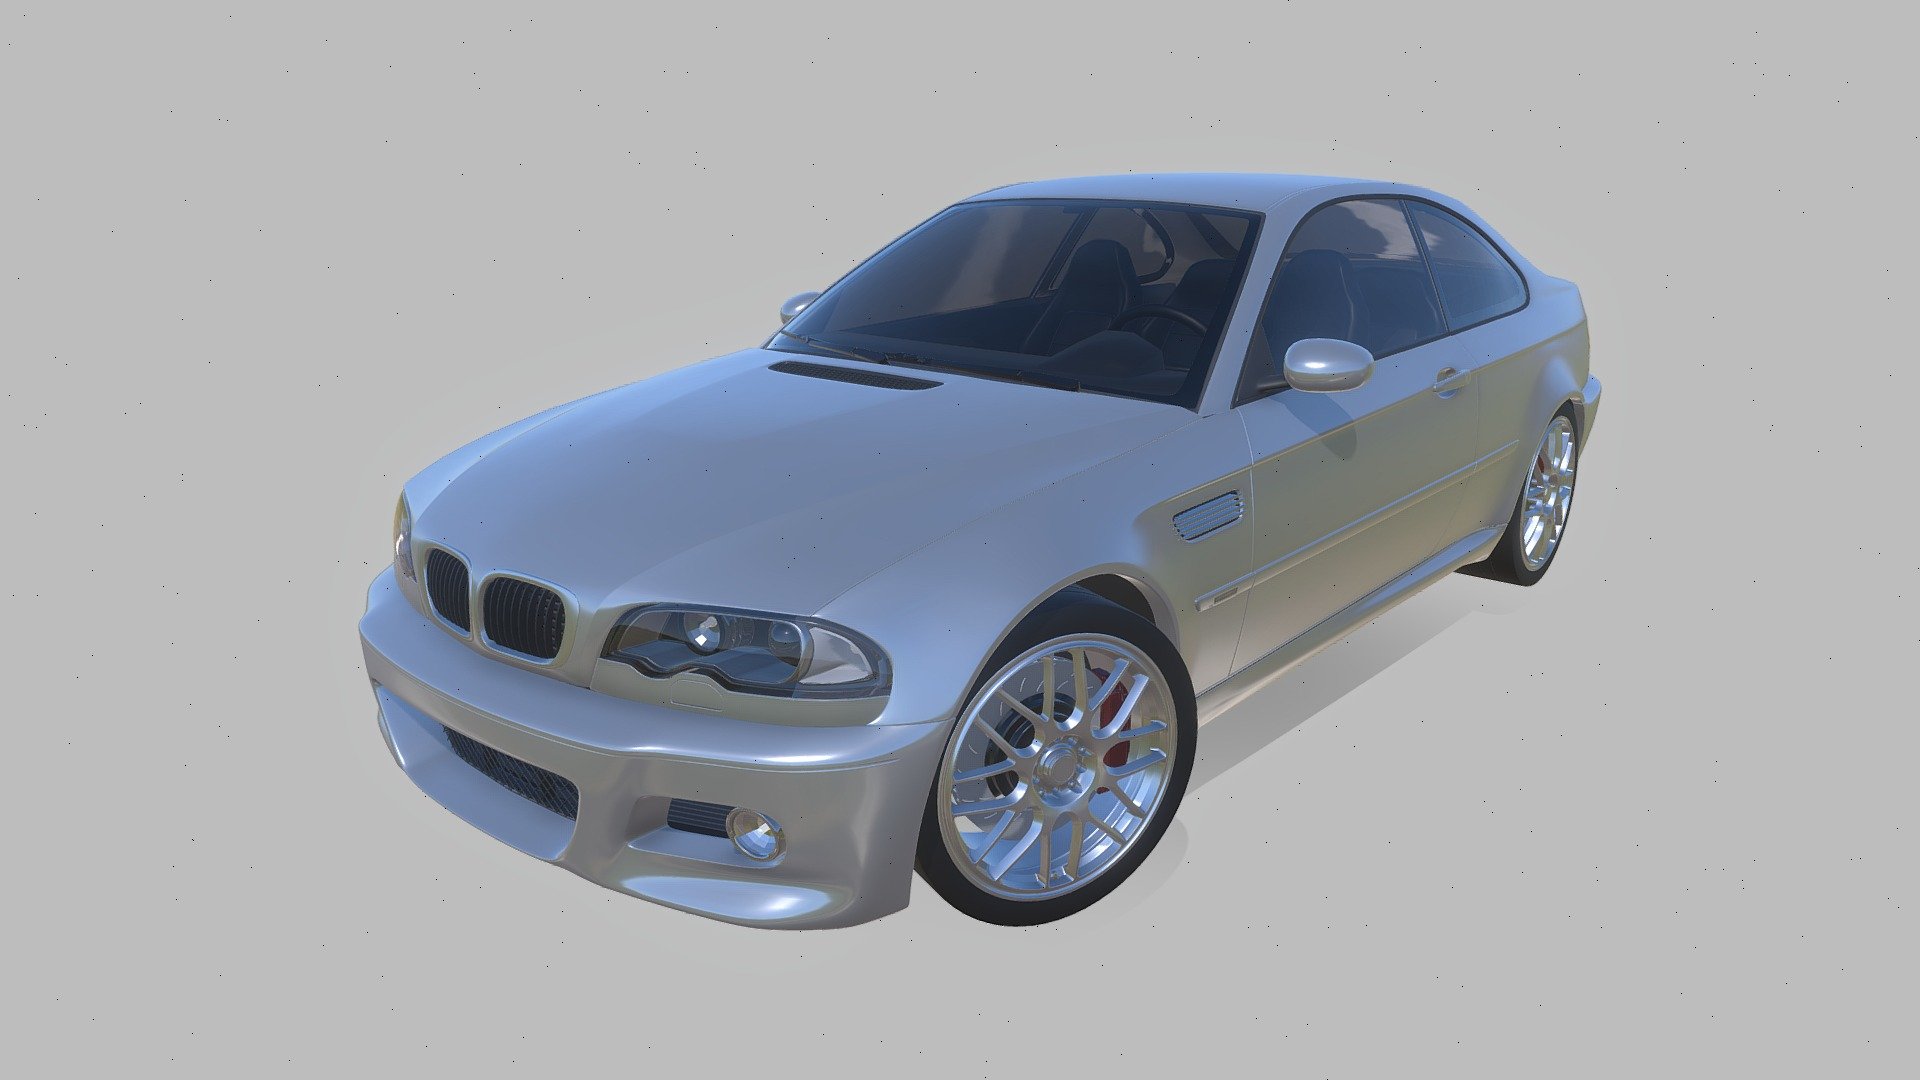 Bmw M3 E46 - 3D modeled using Blender 3D just for practicing and personal improvement on automotive design

High poly - No modifiers applied

Rough interior

Simple materials

File contains UV unwrapped textures (on the tires) with packed image texture

3D modeling timelapse HERE - BMW M3 E46 - Download Free 3D model by Márcio Meireles (@marciomeireles) 3d model